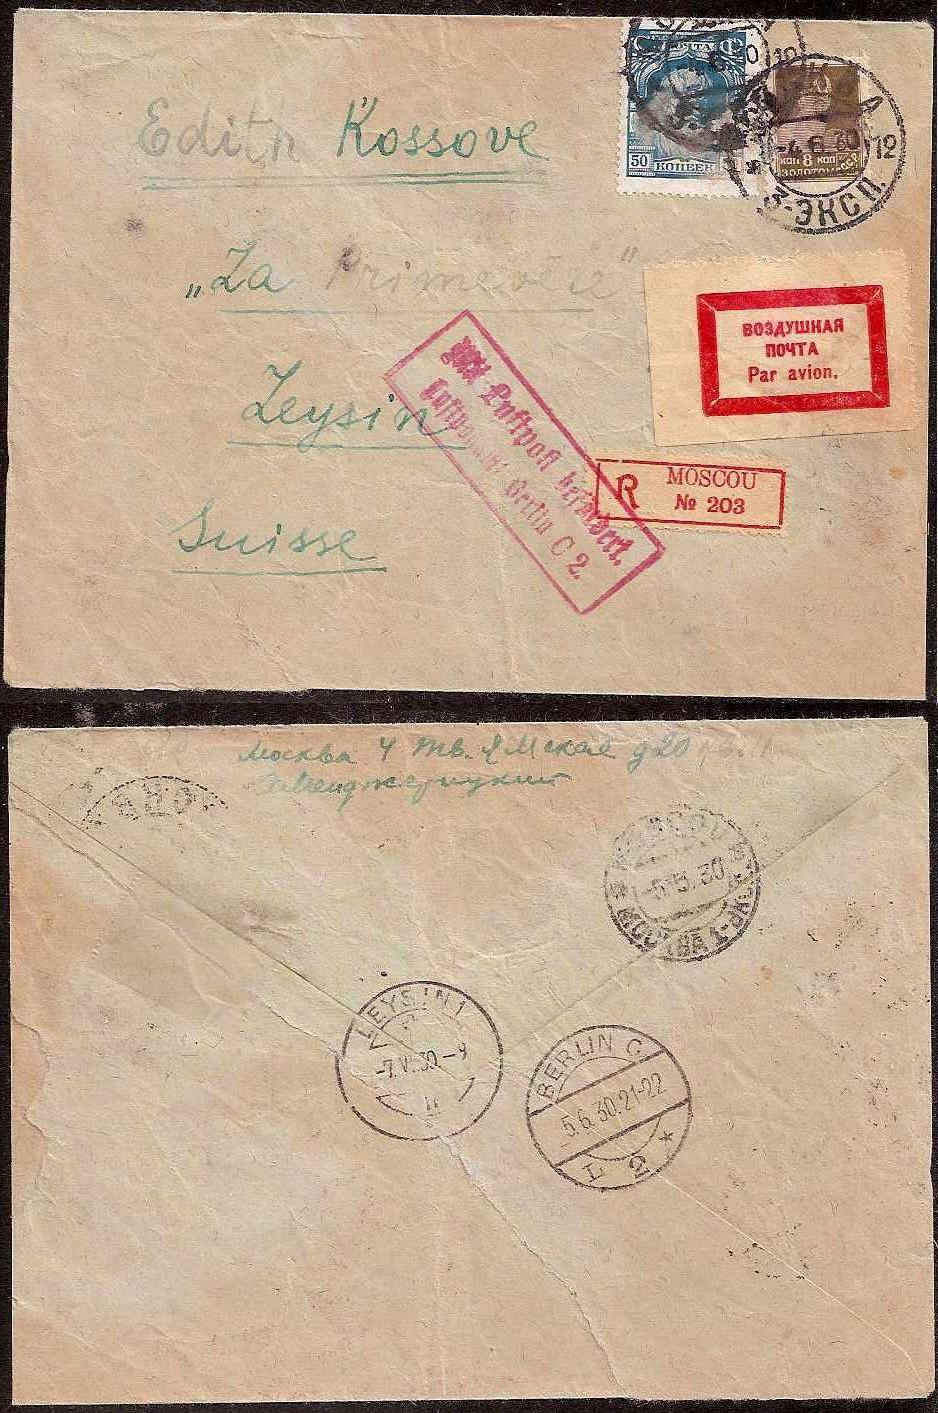 Russia Postal History - Airmails. Airmail covers Scott 1930 